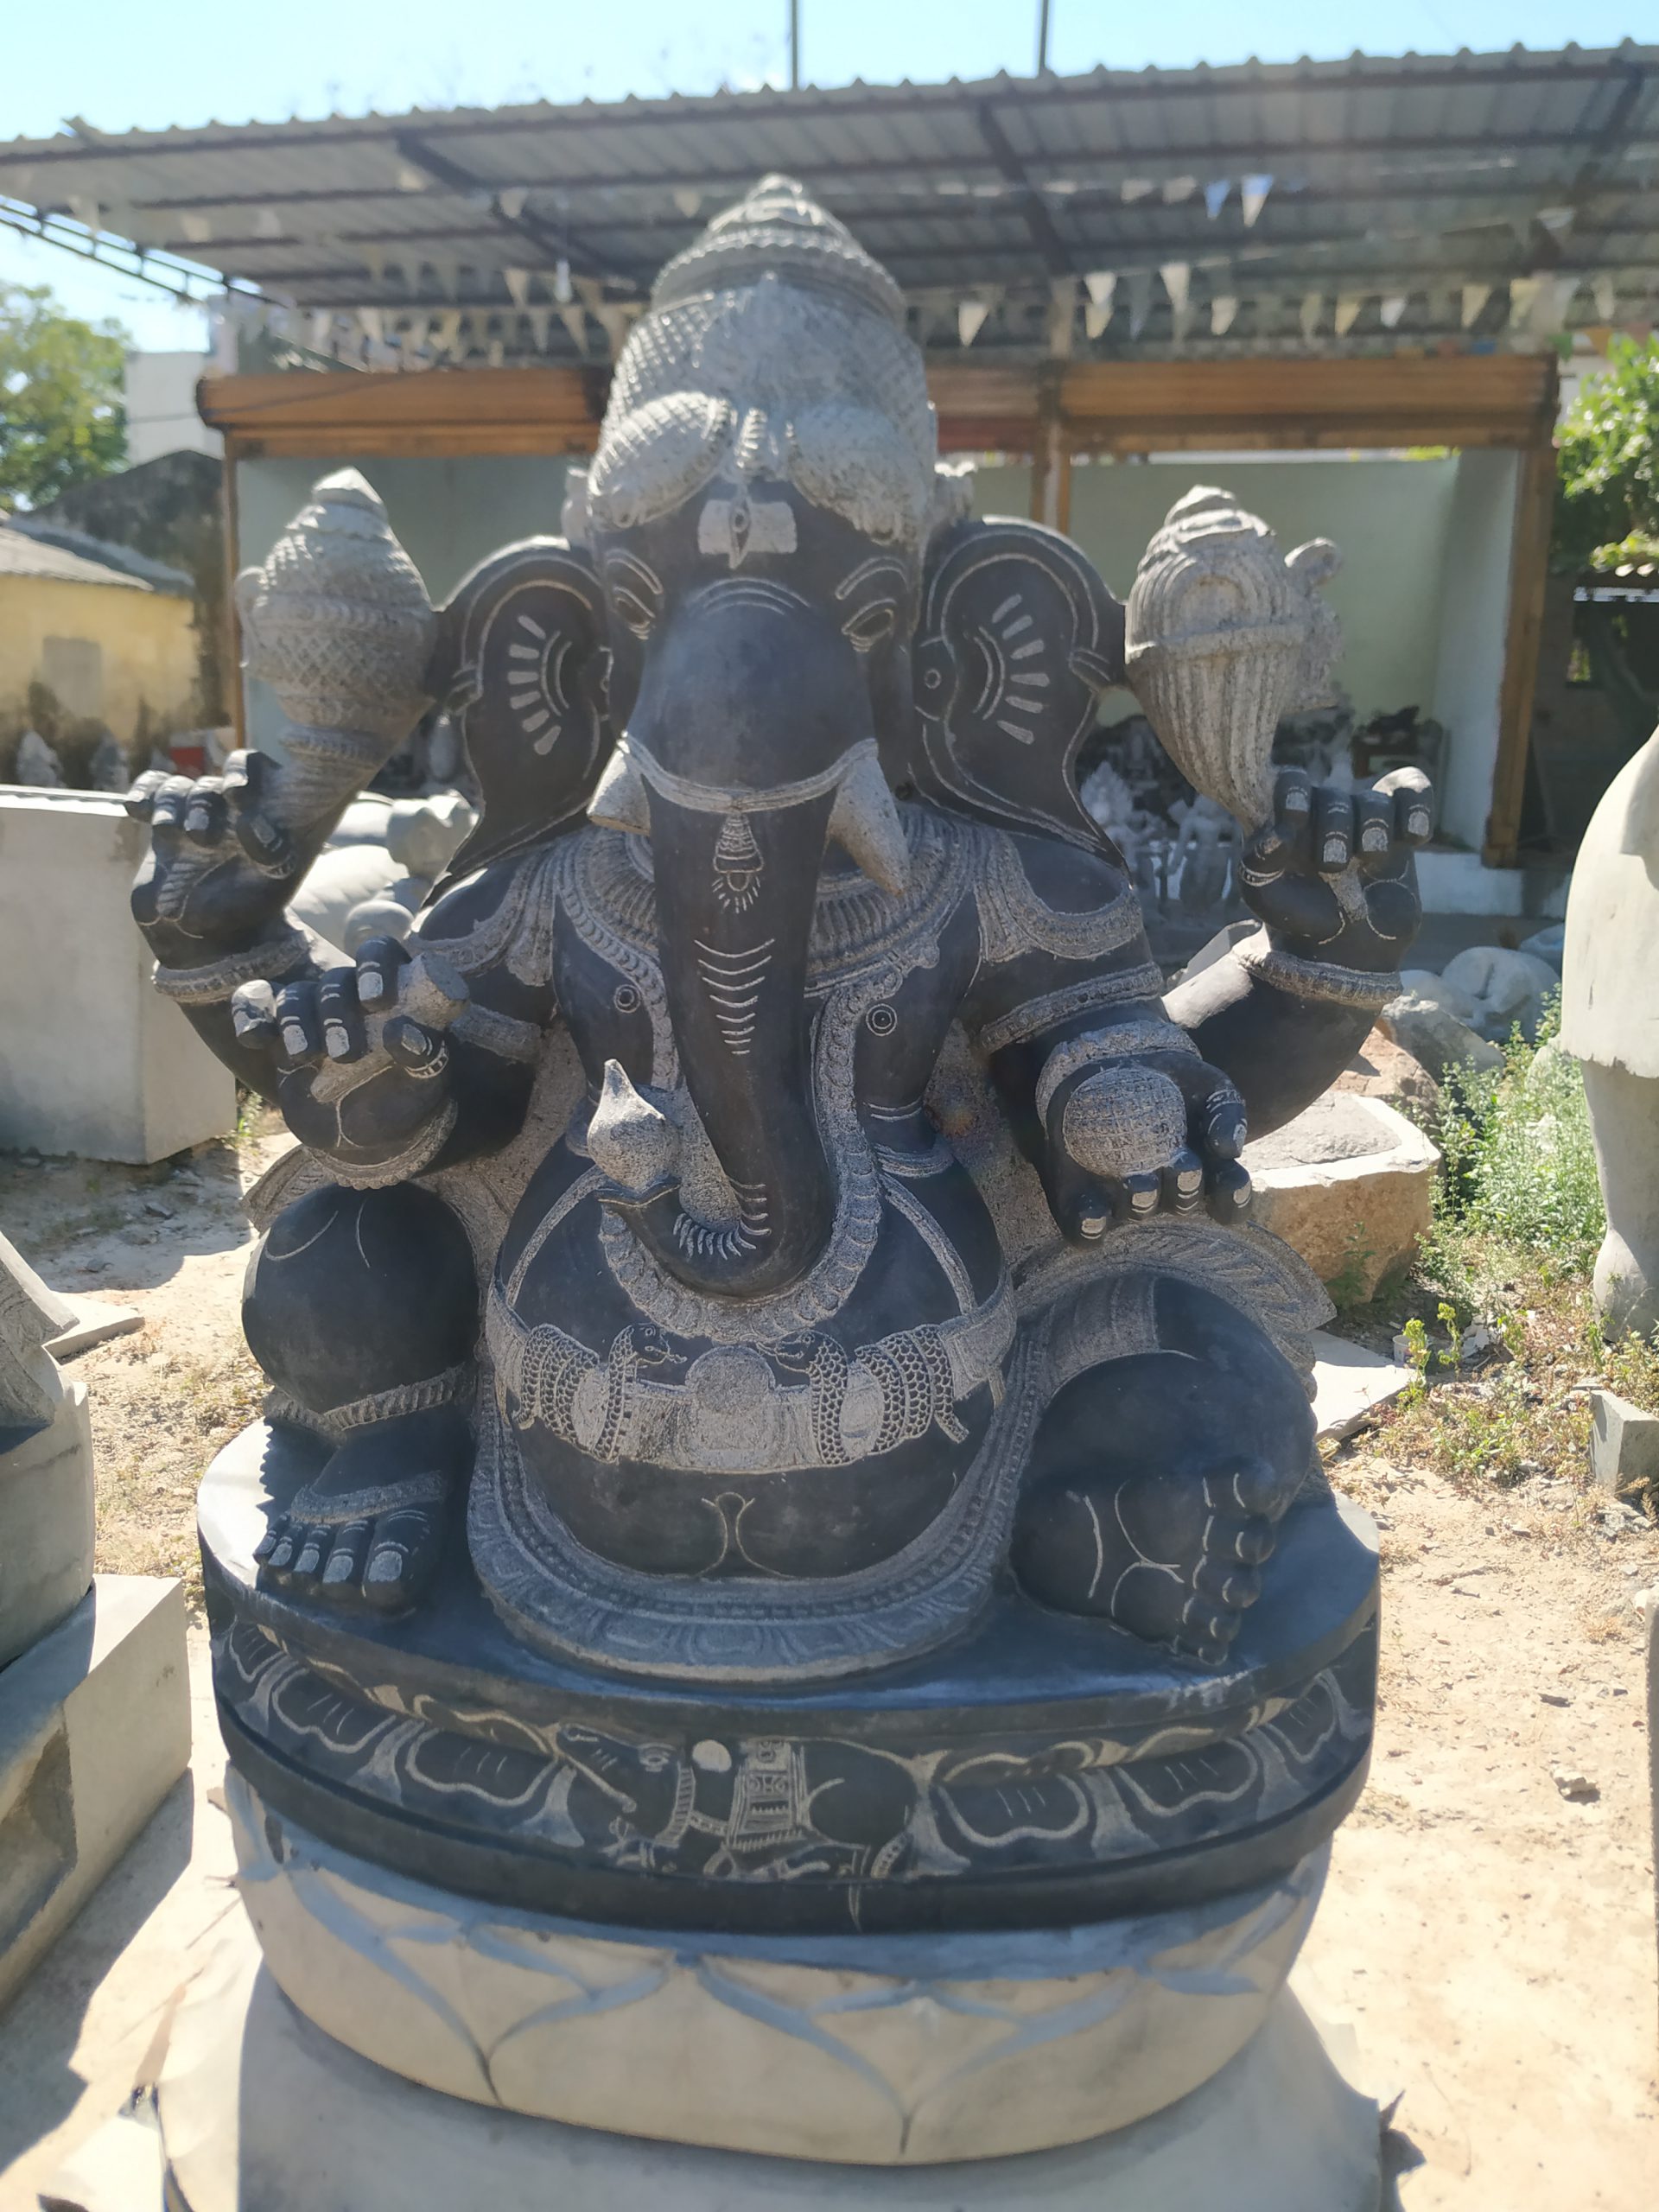 Ganesha Stone Statue 4 1/2 Feet - Temple Statues For Sale Online